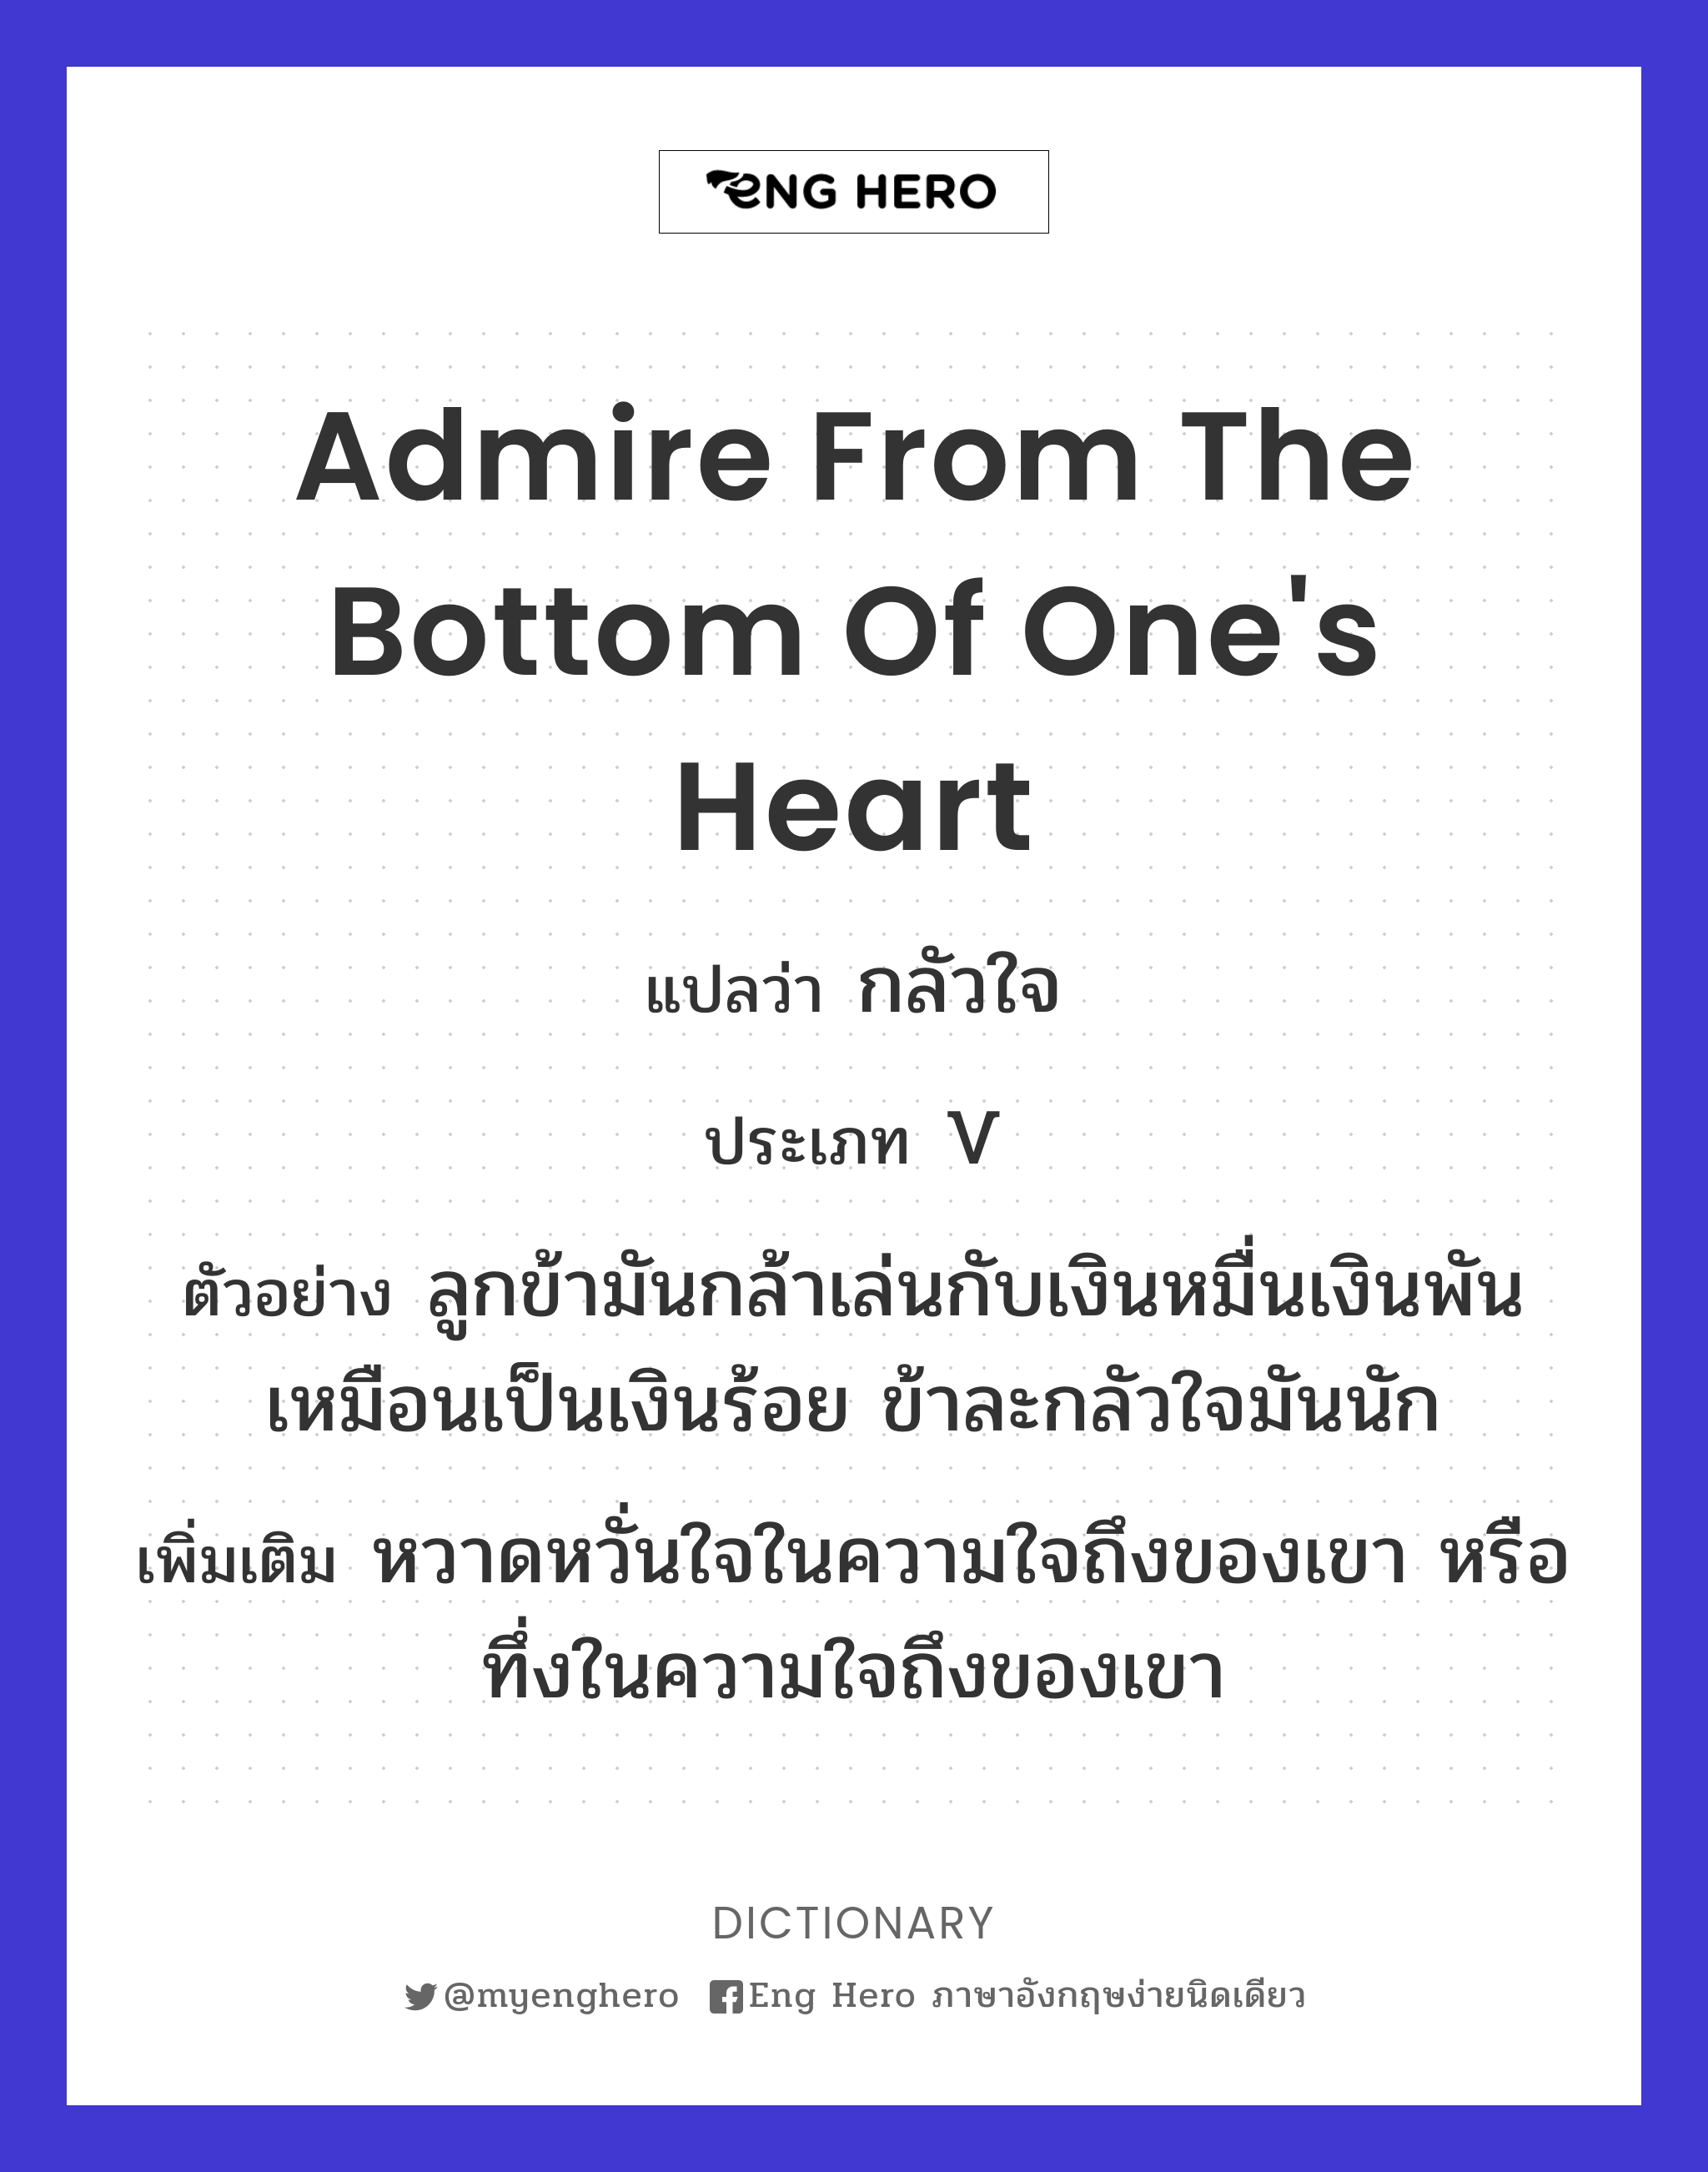 admire from the bottom of one's heart